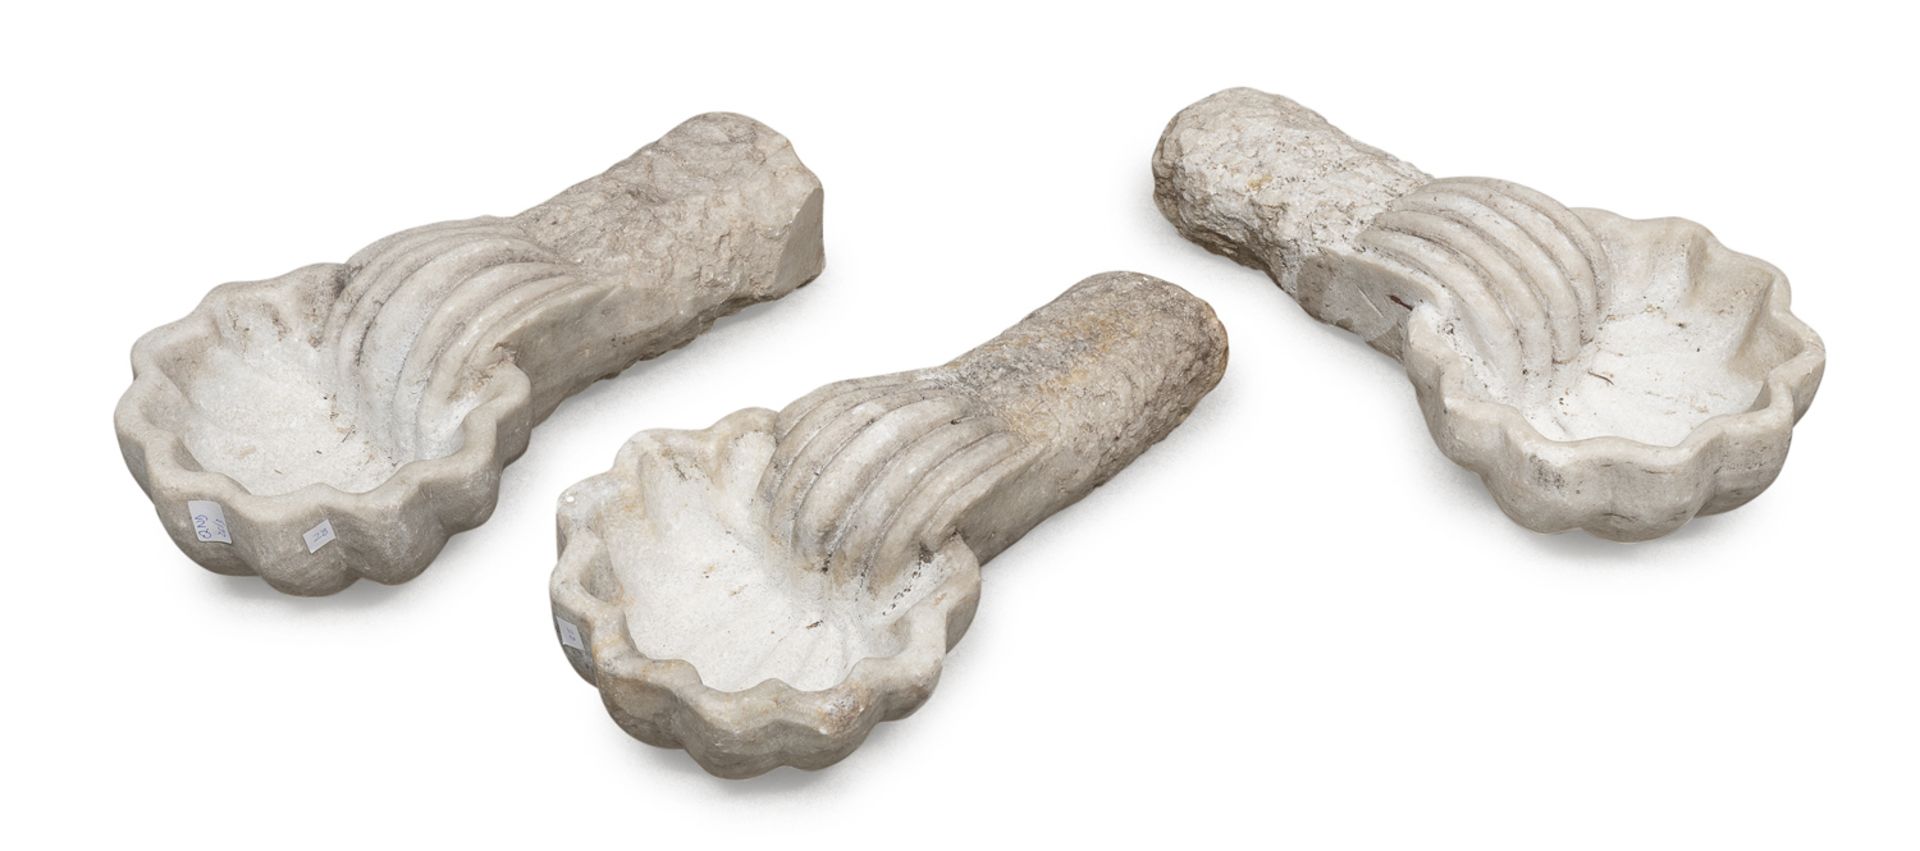 THREE SMALL STOUPS IN WHITE MARBLE 17th CENTURY